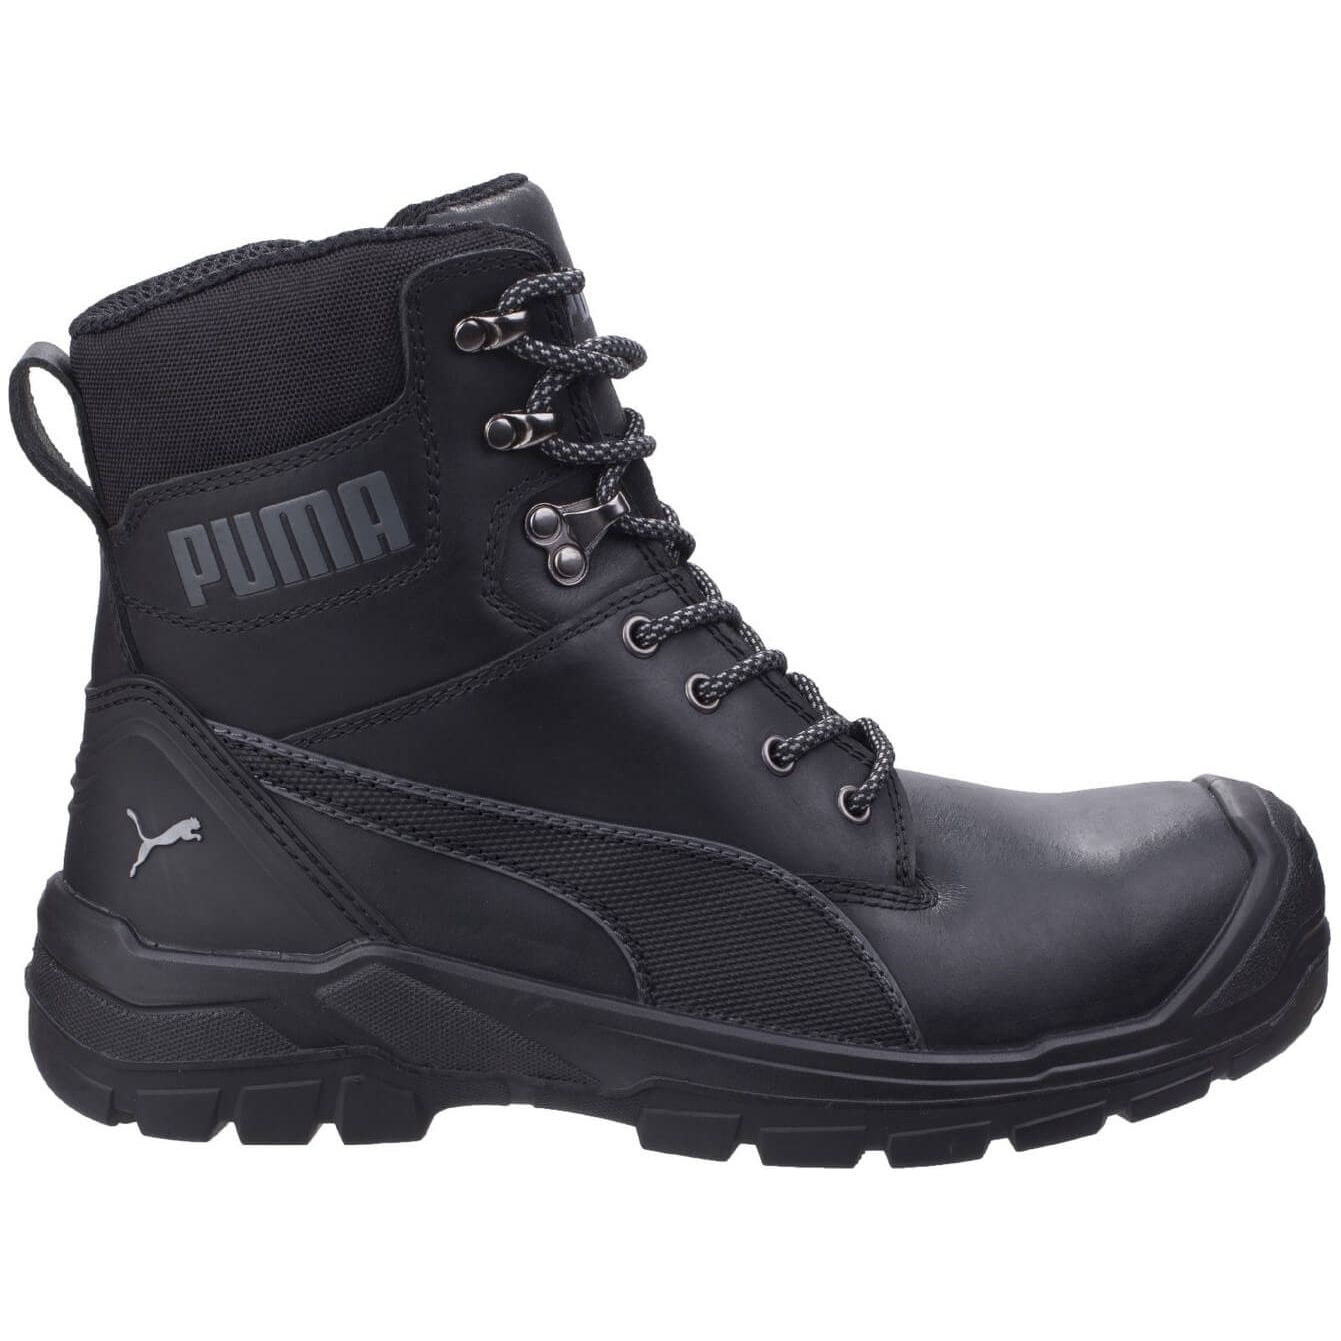 Puma Conquest 630730 High Safety Boot-Black-4